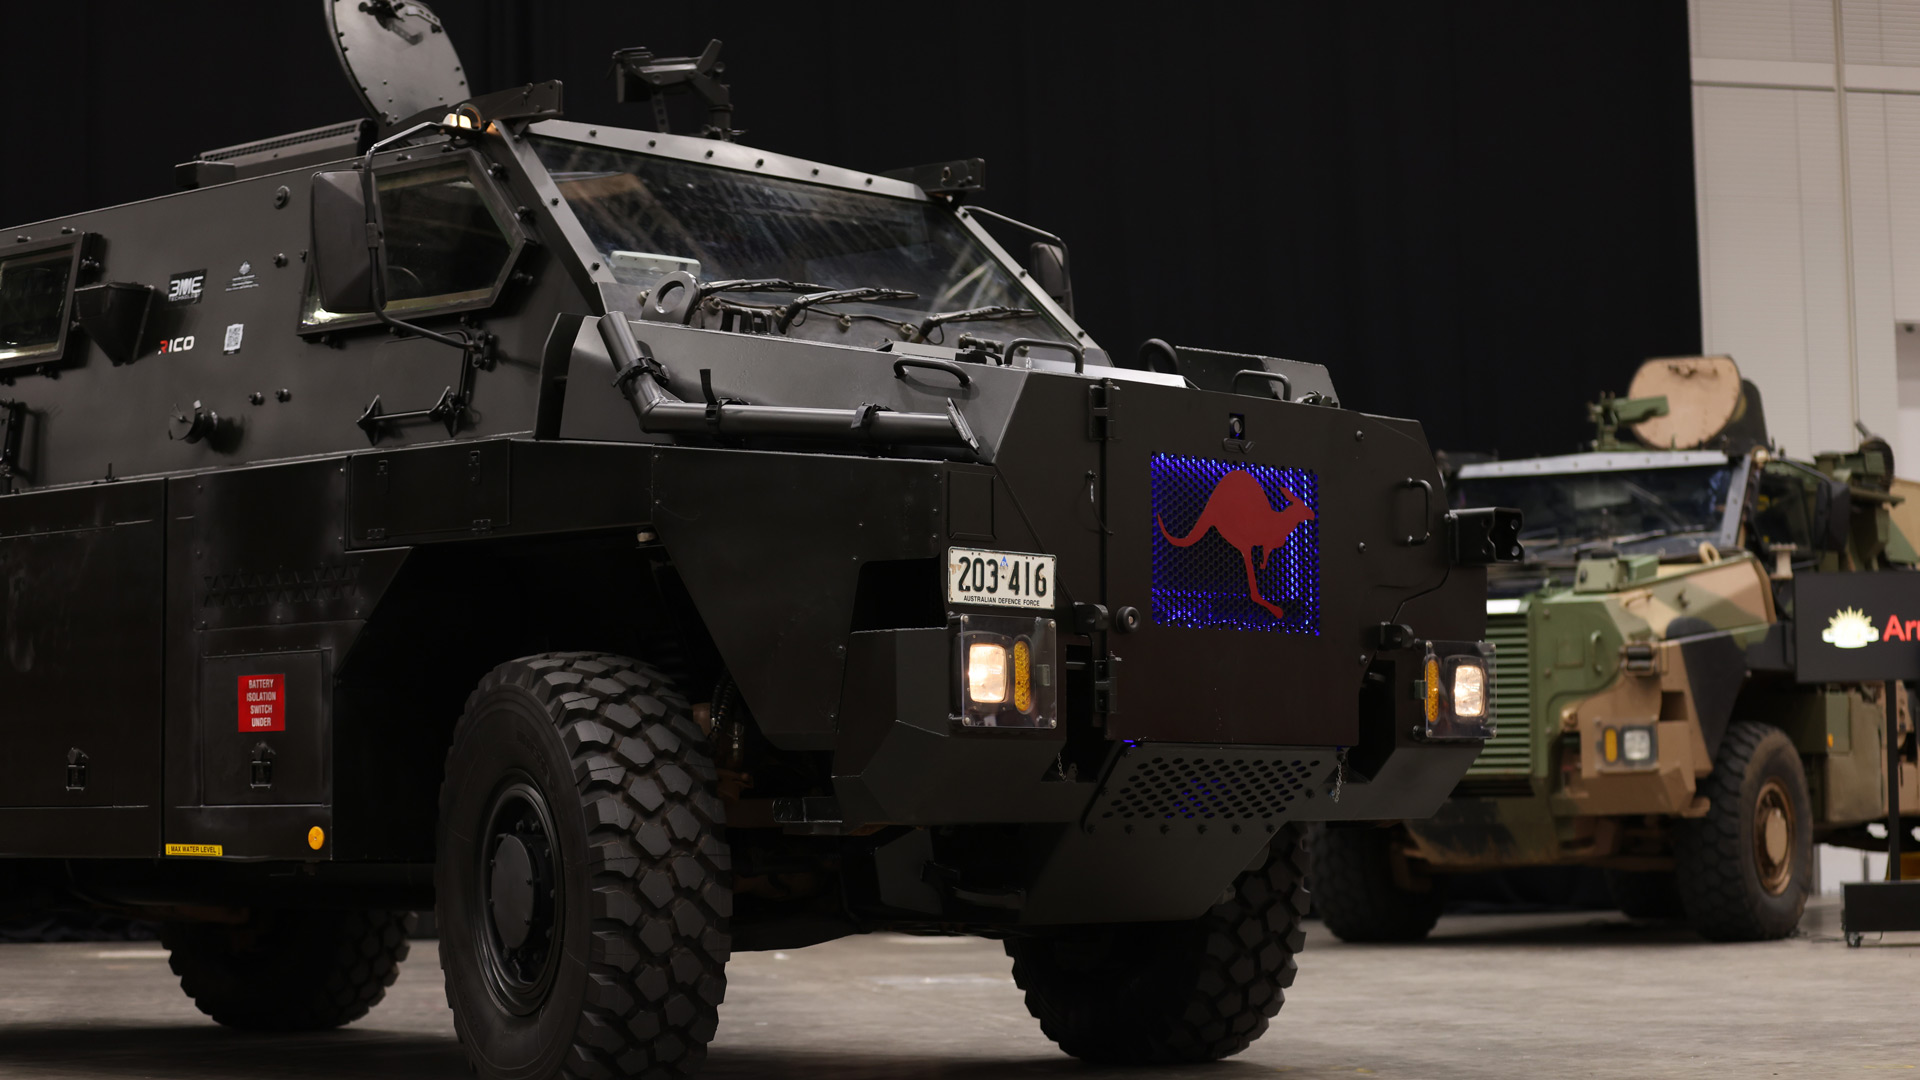 A Bushmaster Electric Protected Mobility Vehicle after being unveiled during the Chief of Army Symposium 2022.